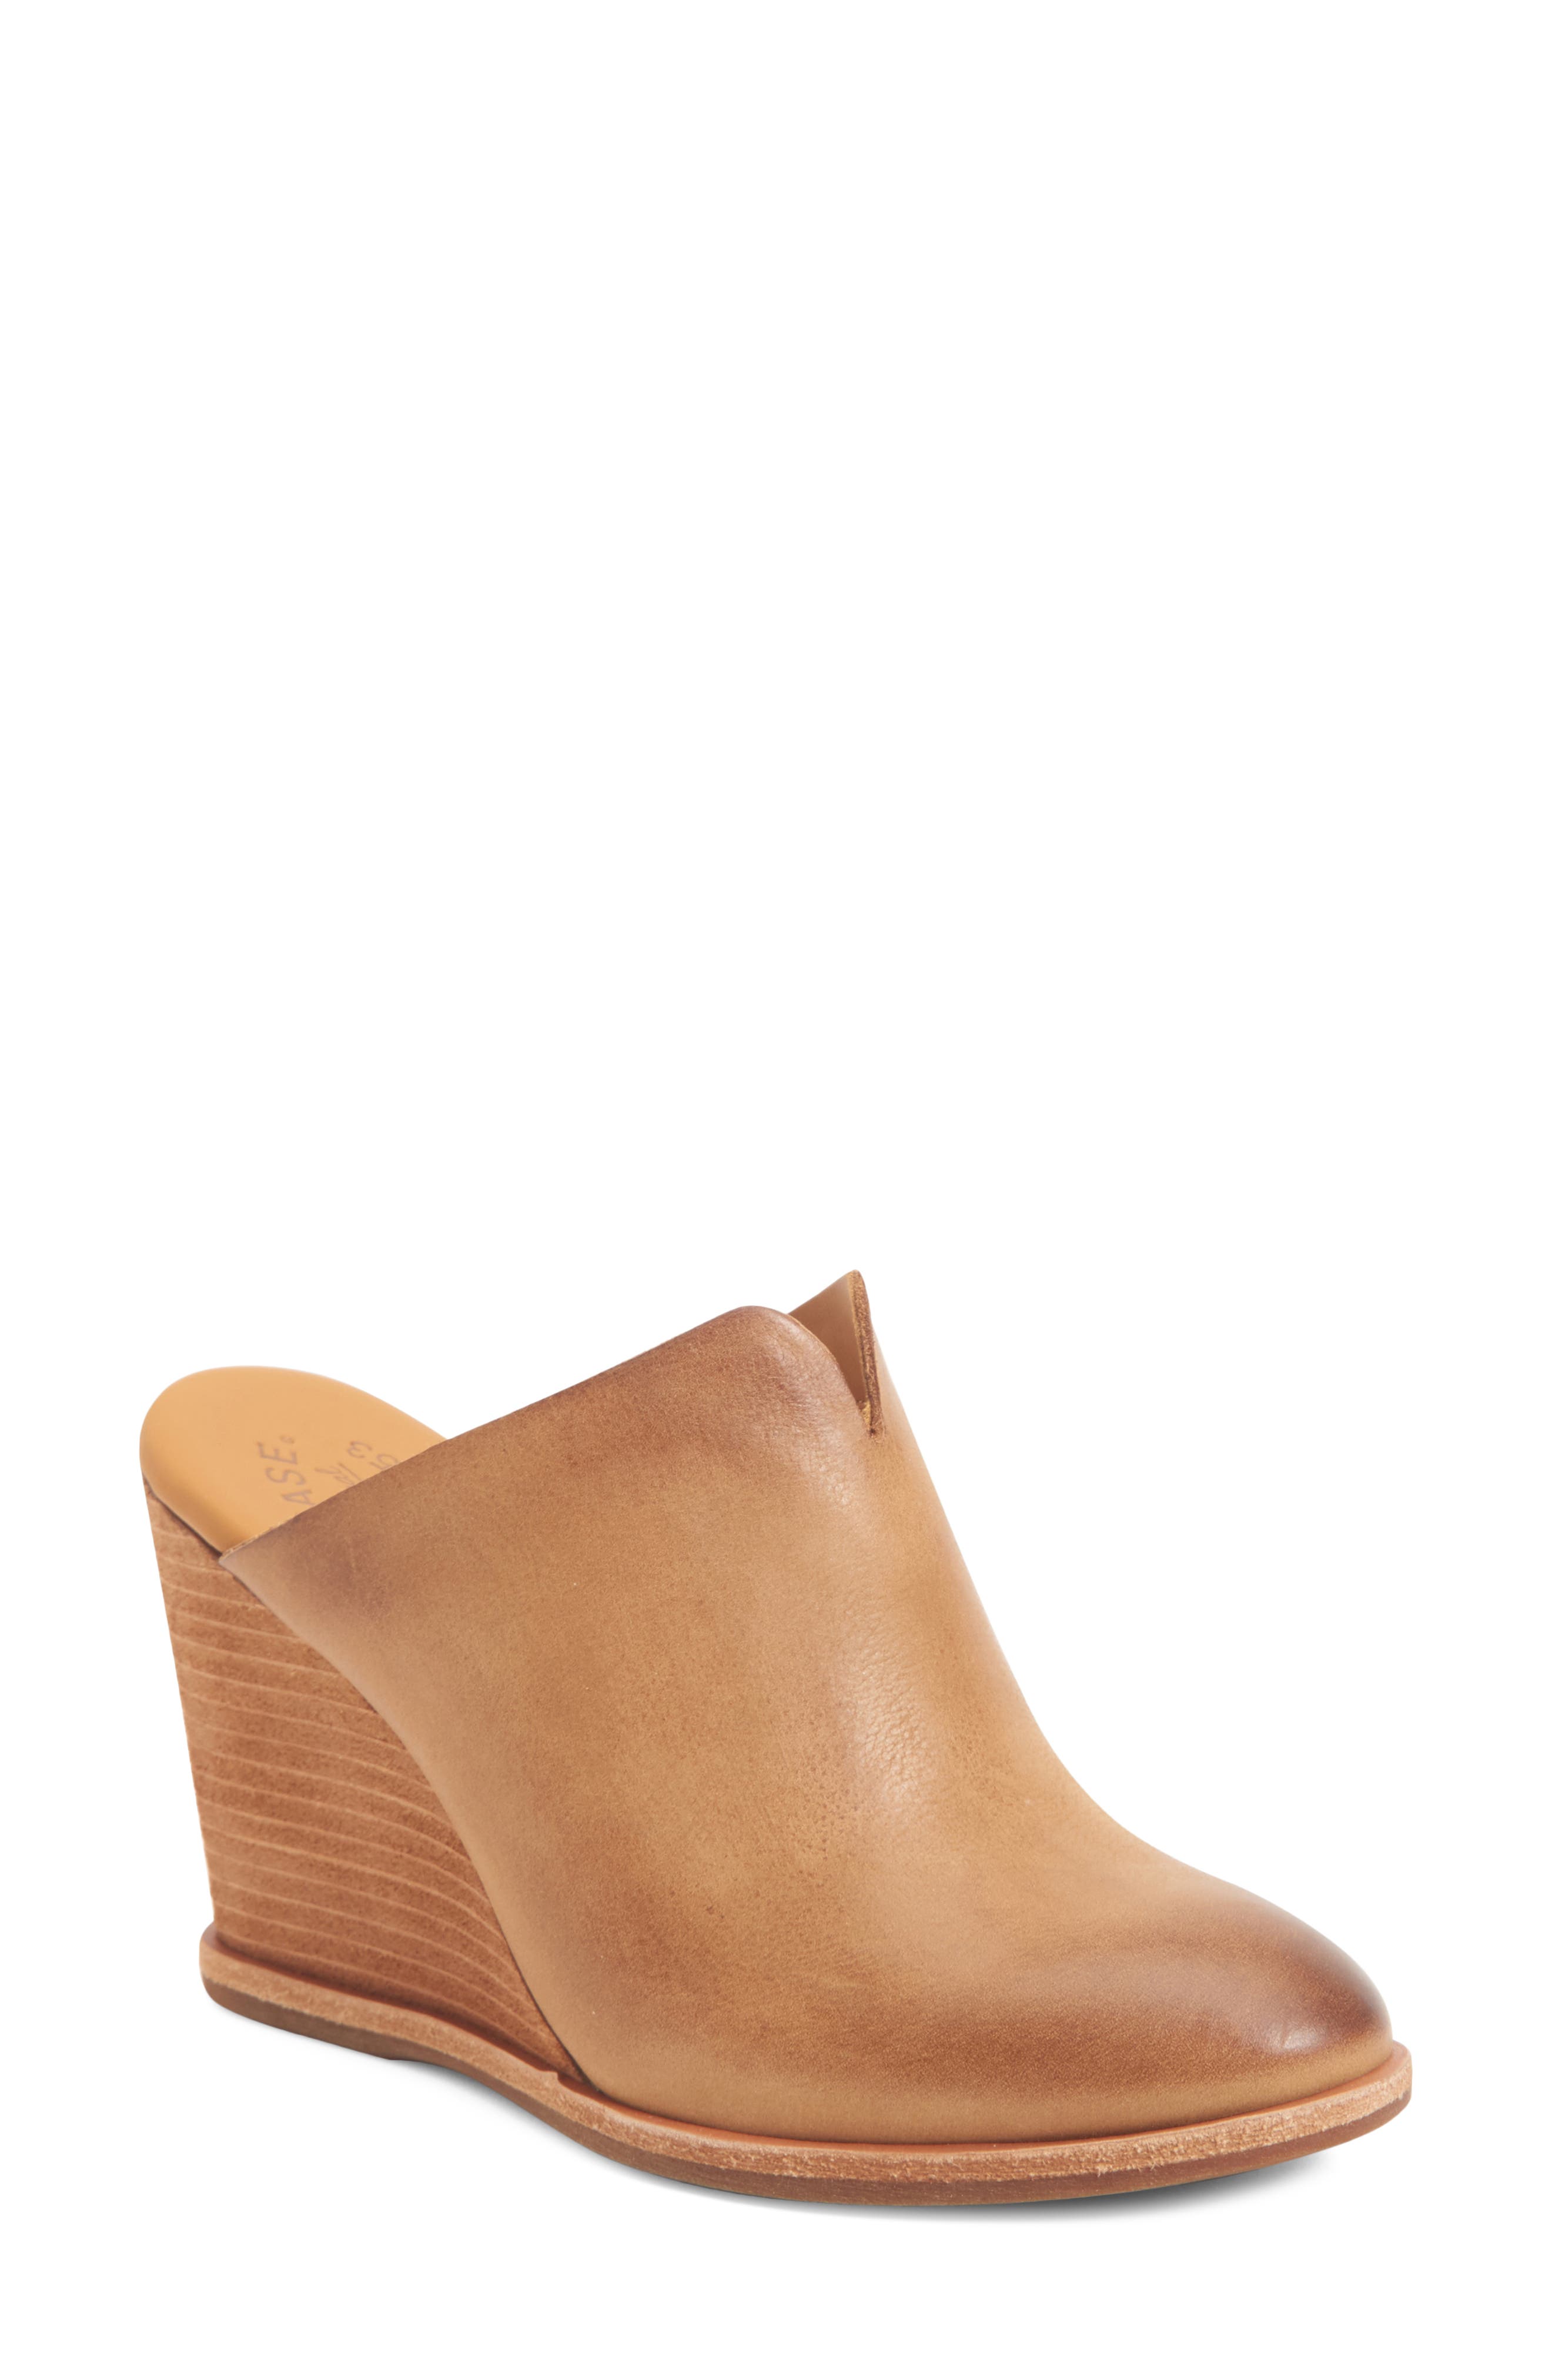 wedge mules and clogs